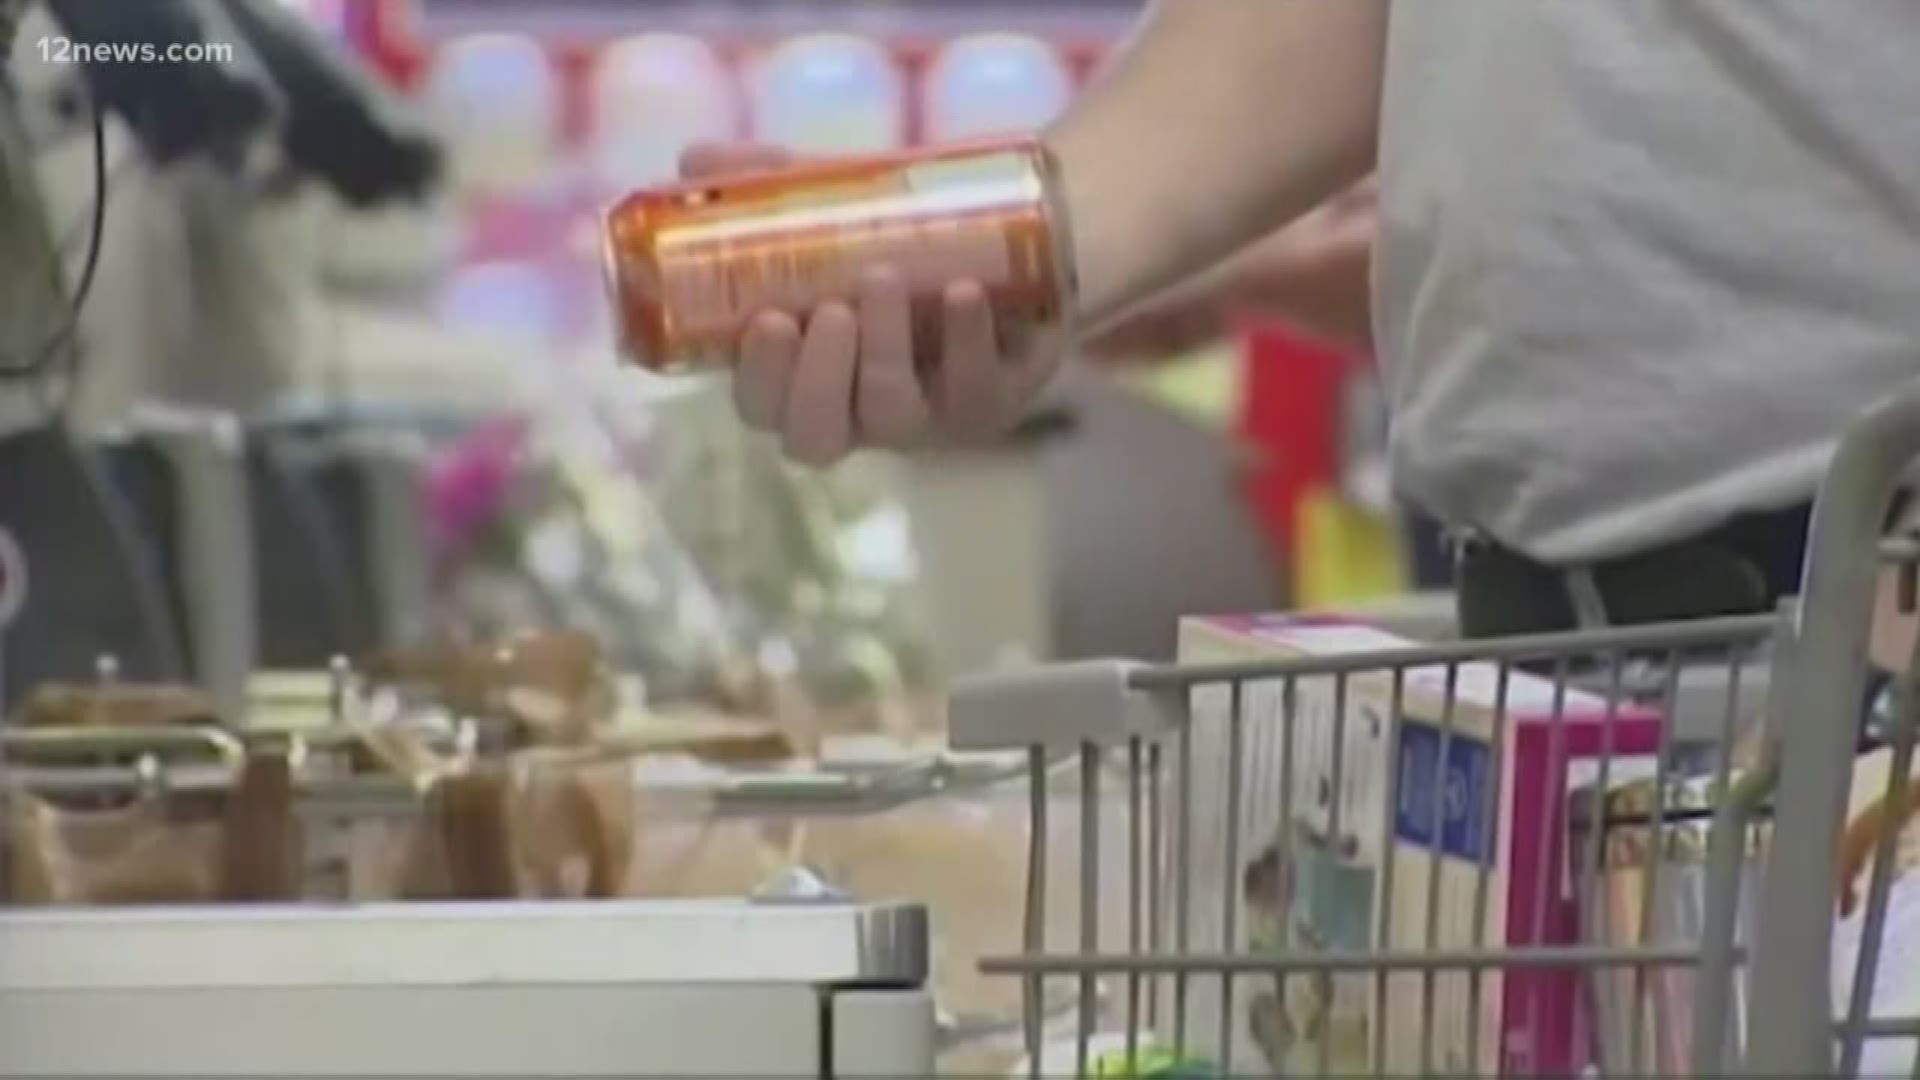 Grocery stores are not going to run out of food, they just need time to restock. The public can help by checking their behaviors and not hoarding supplies.